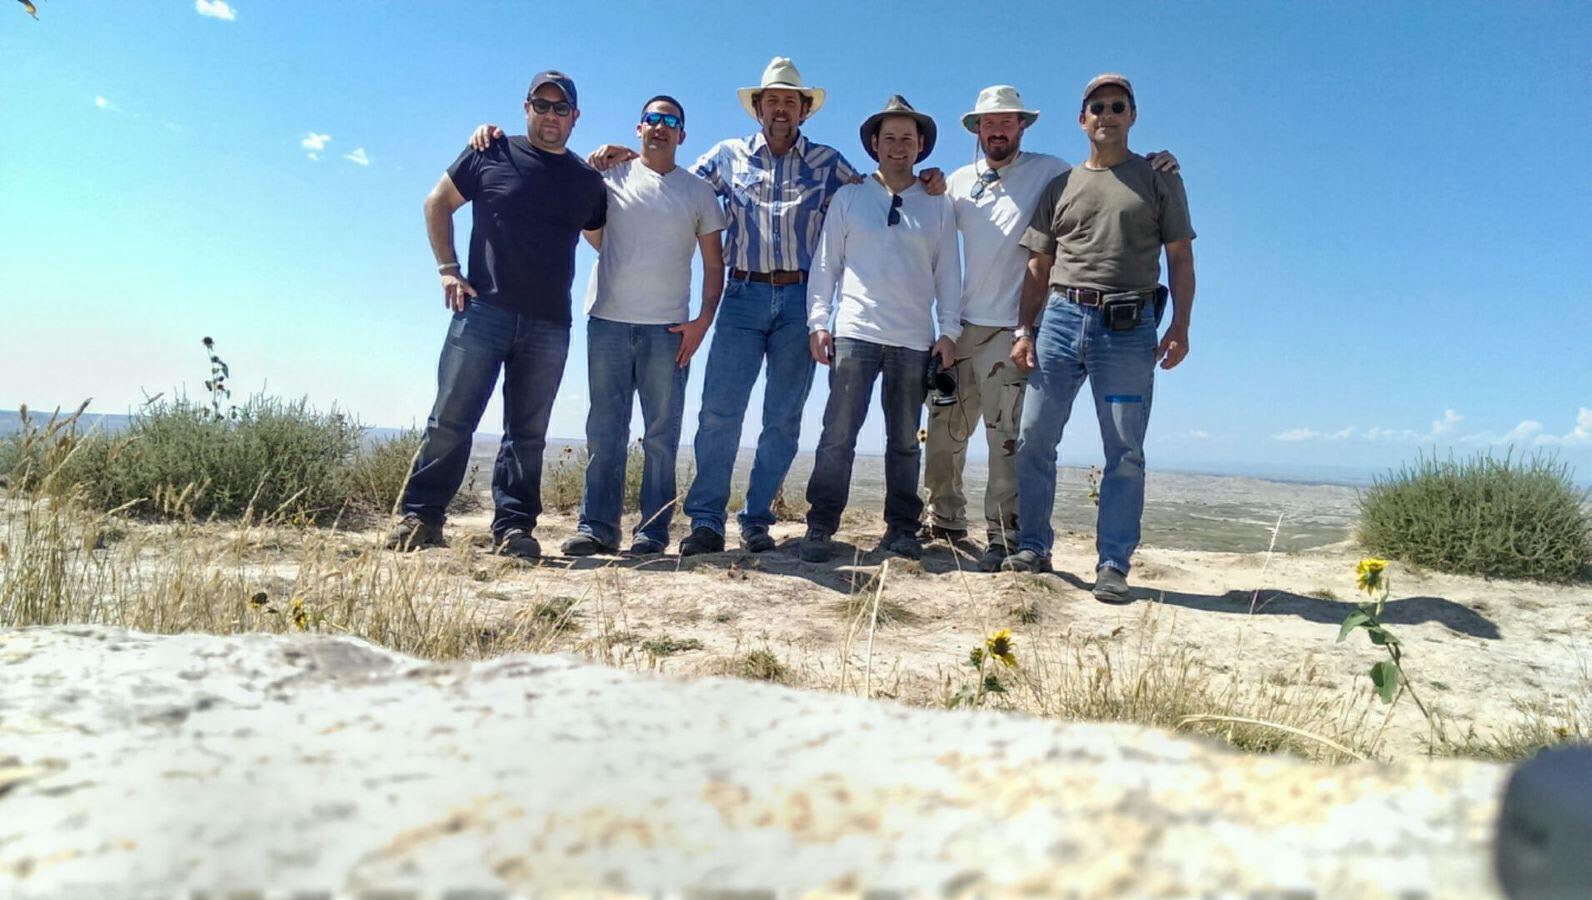 With Ilan Arboleda, William Rodriguez, Phil Straub, Peter Bolte and Carl Prinzi in the Badlands of South Dakota for Thank You for Your Service (2013)